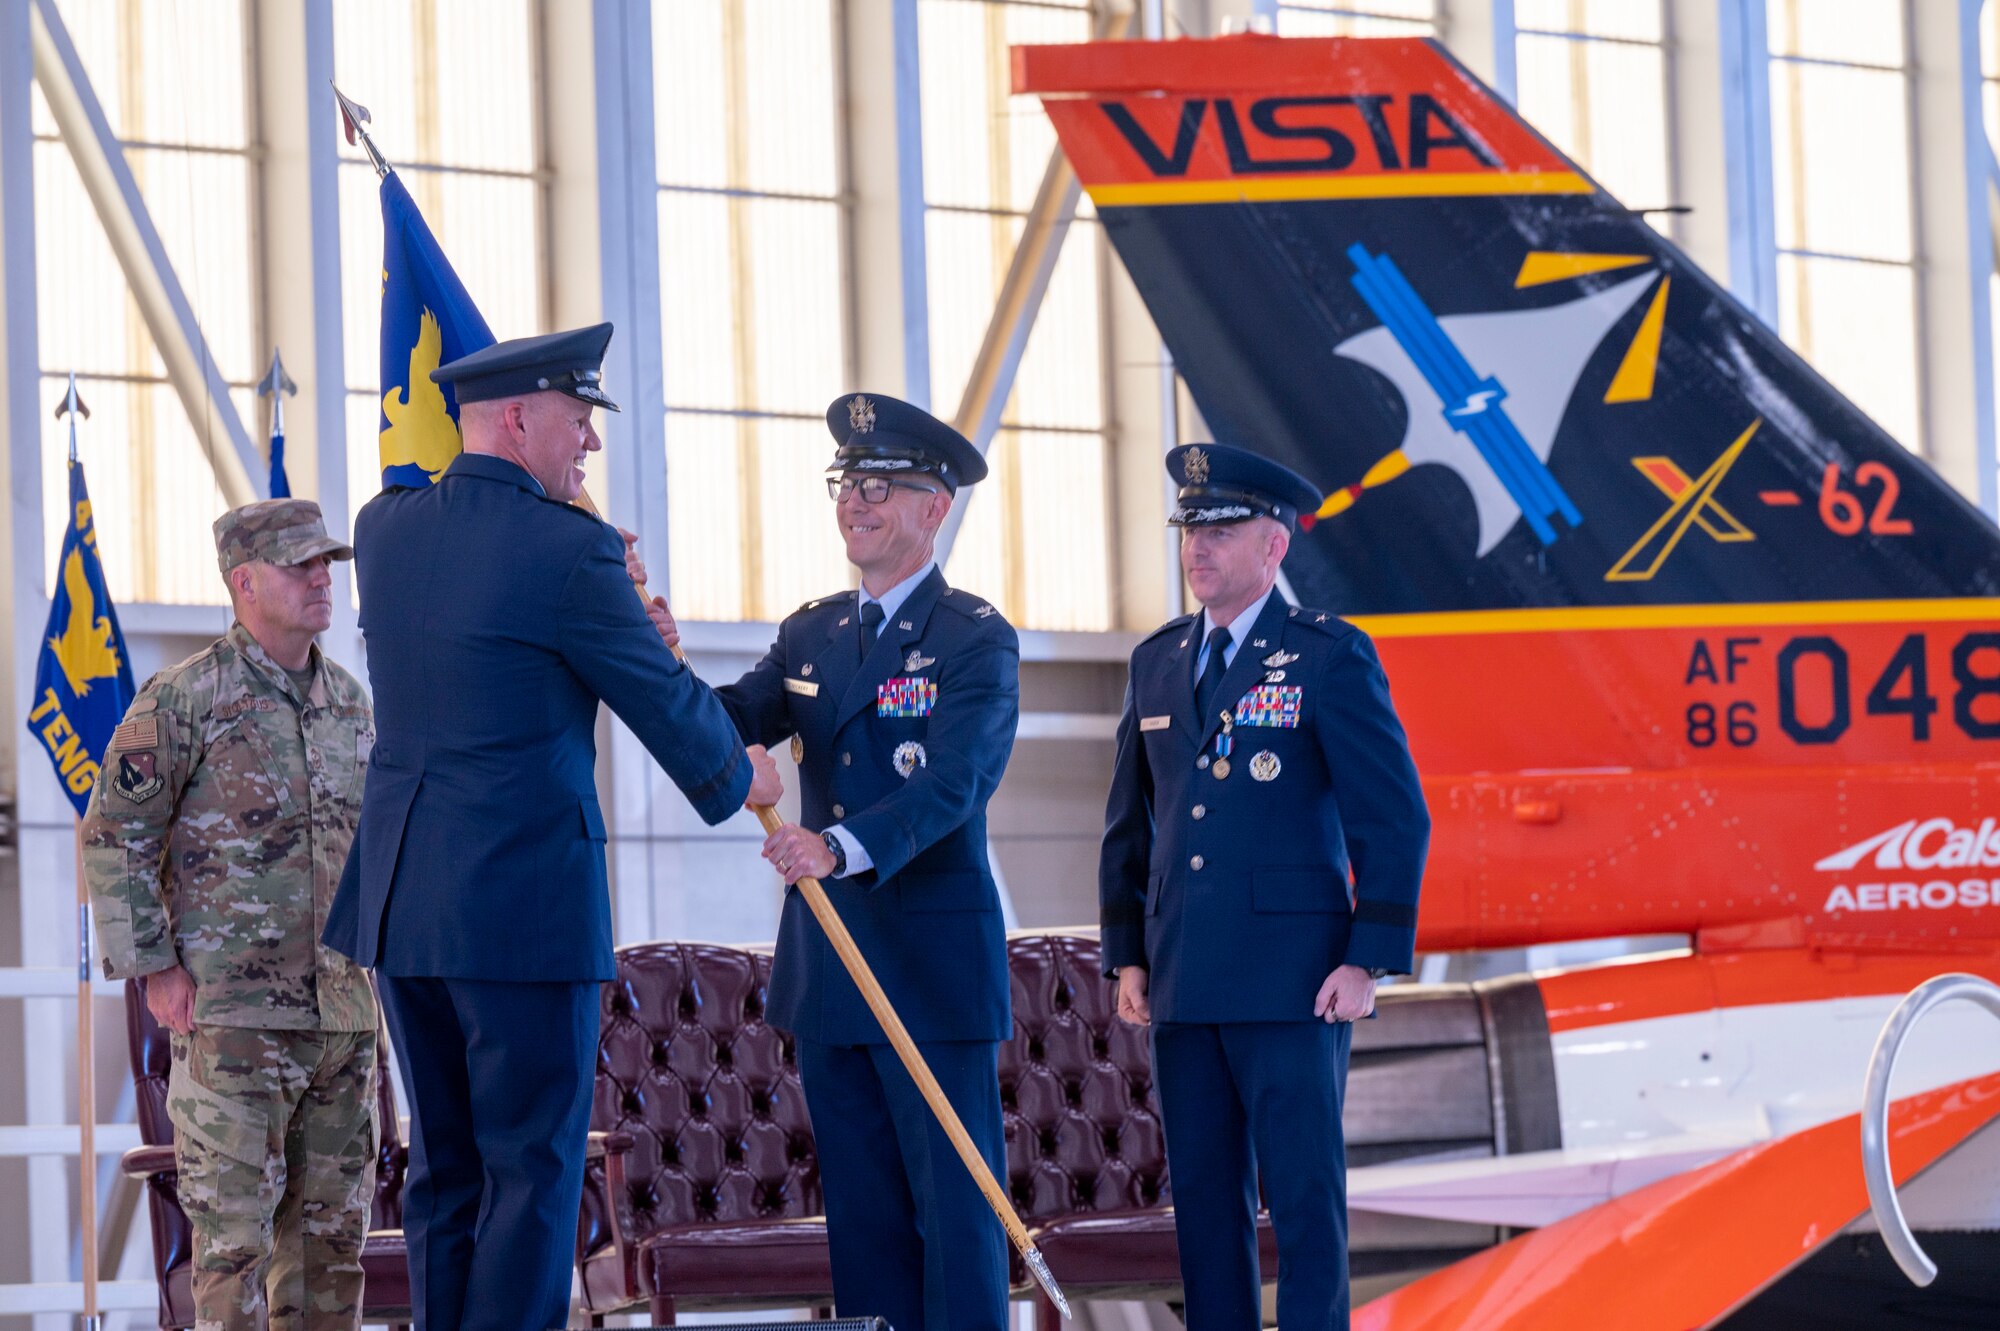 The 412th Test Wing’s new commander, Col. Douglas Wickert, assumes command of the Wing by receiving the unit guidon from Maj. Gen. Evan Dertien, Air Force Test Center commander, during the Wing’s Change of Command Ceremony at Edwards Air Force Base, California, Aug.18.